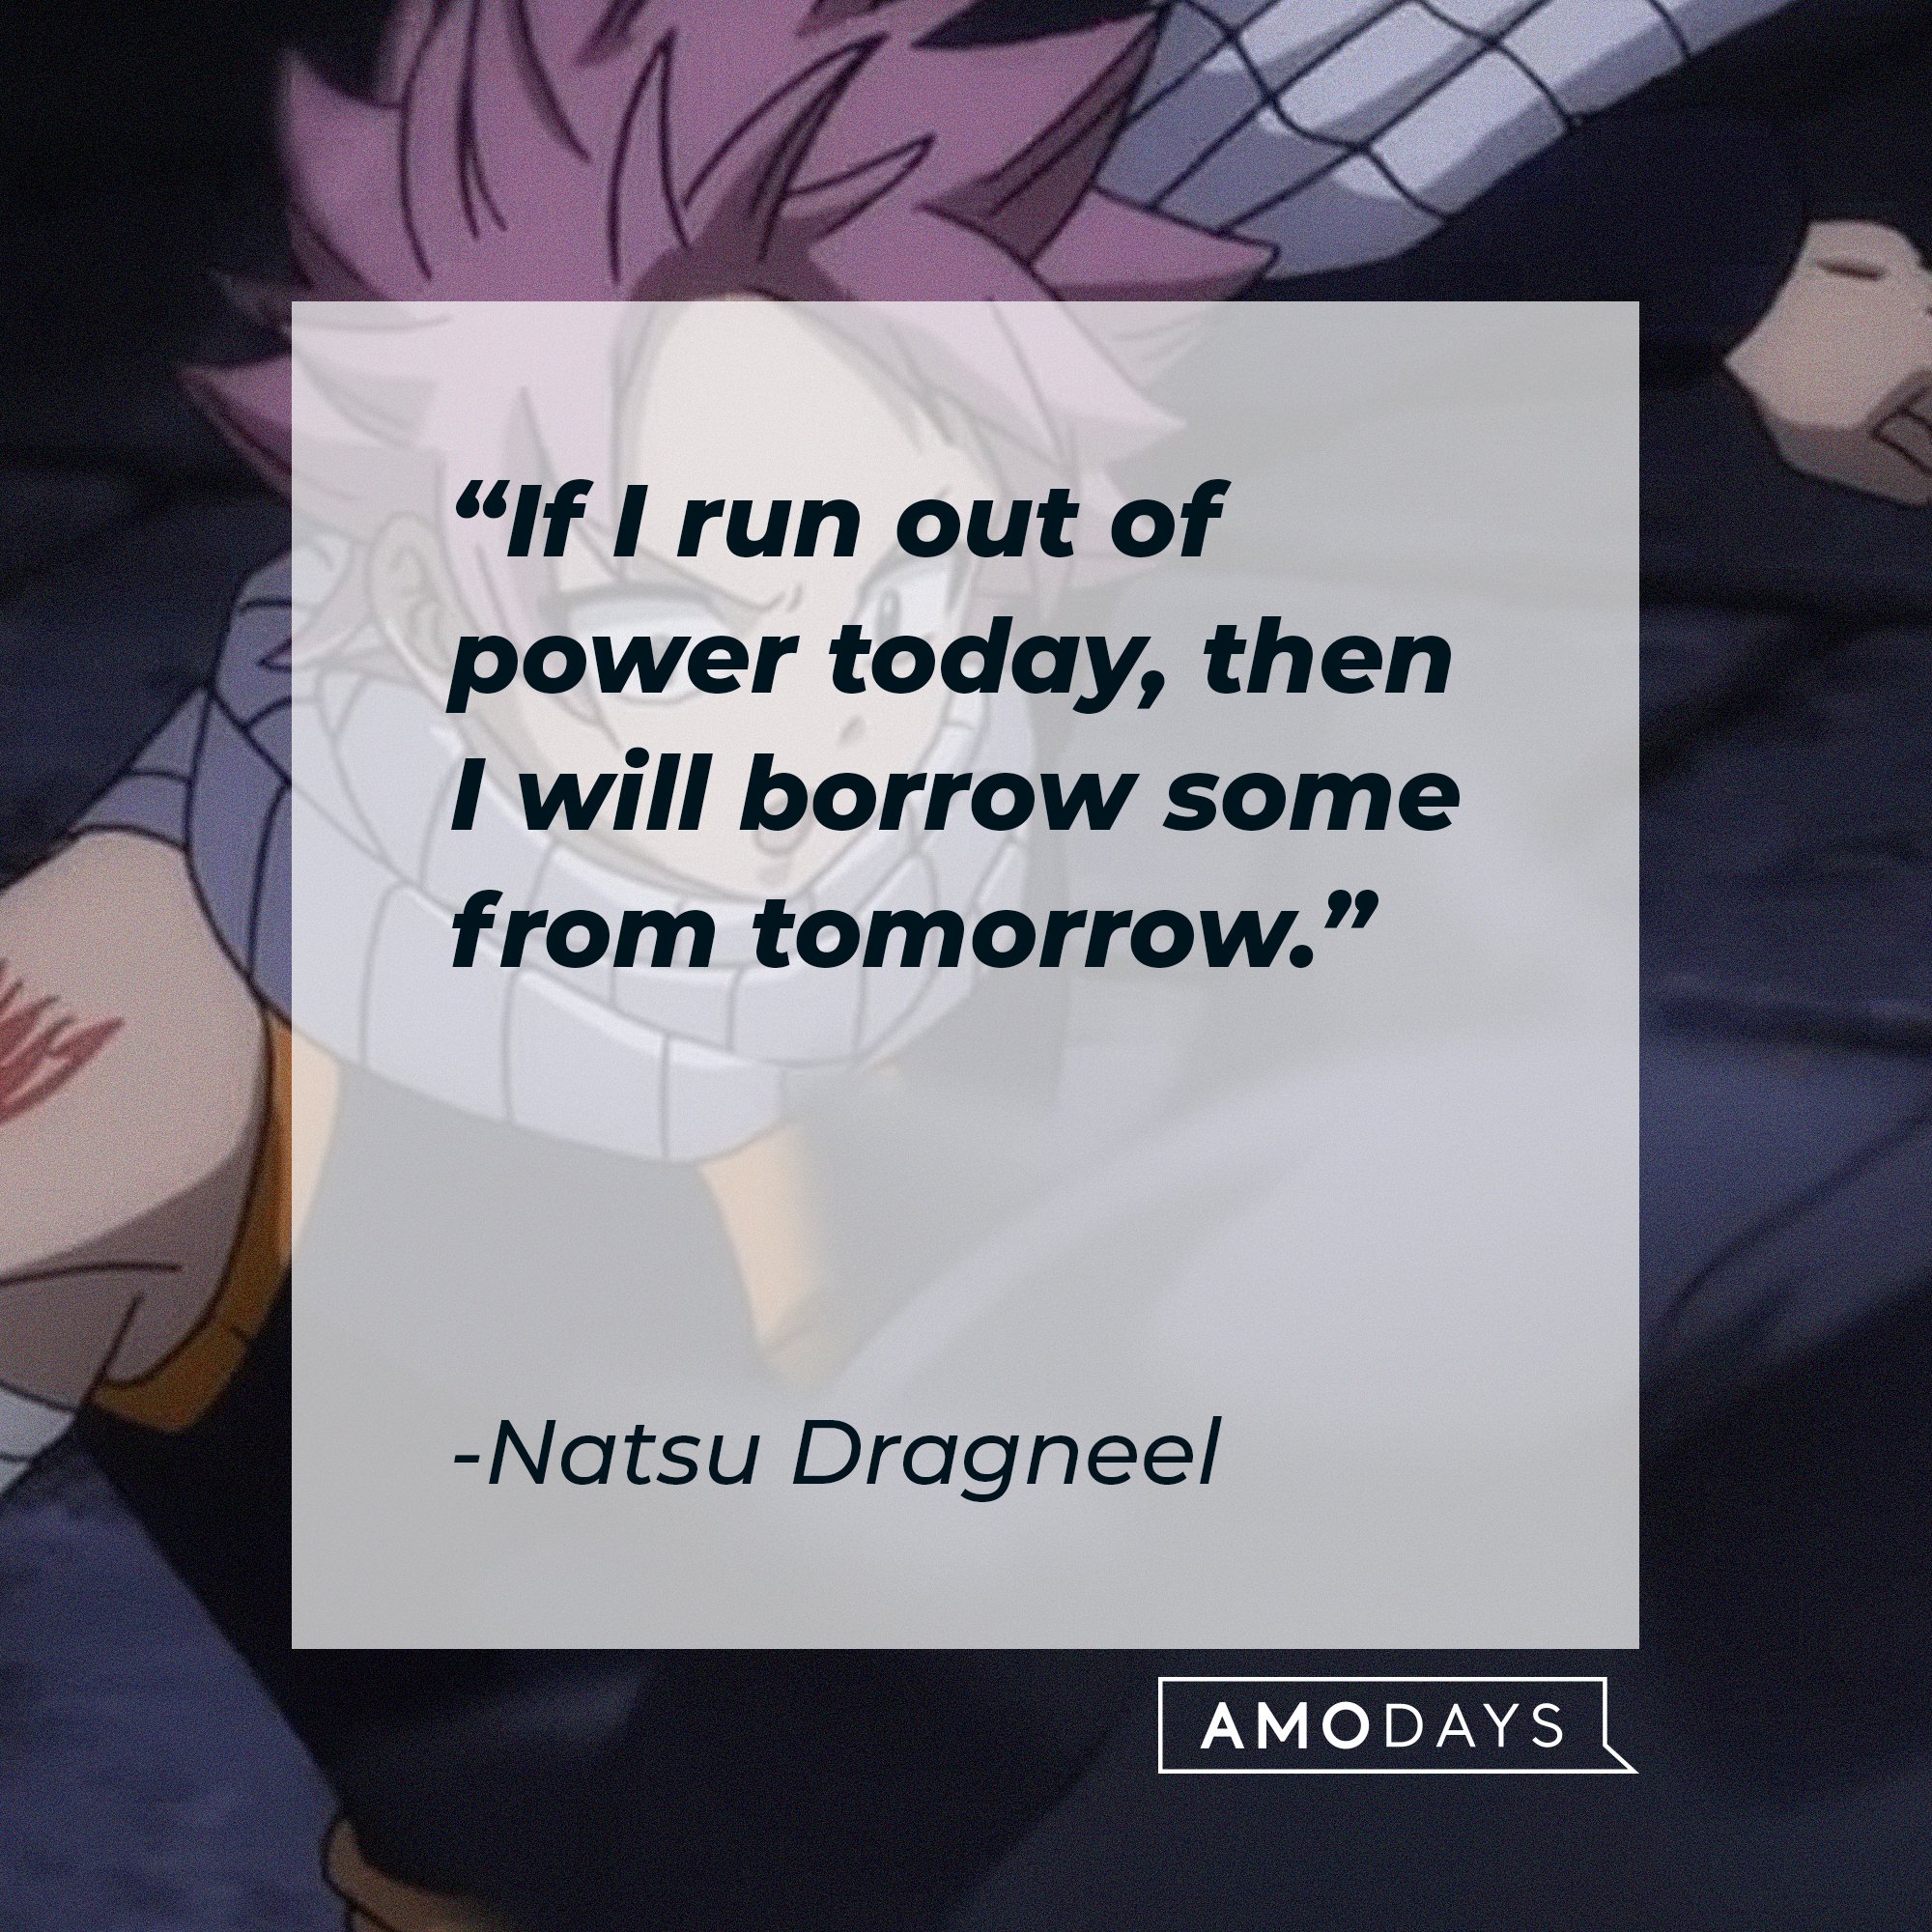 Natsu Dragneel ’s quote: "If I run out of power today, then I will borrow some from tomorrow.” | Image: AmoDays